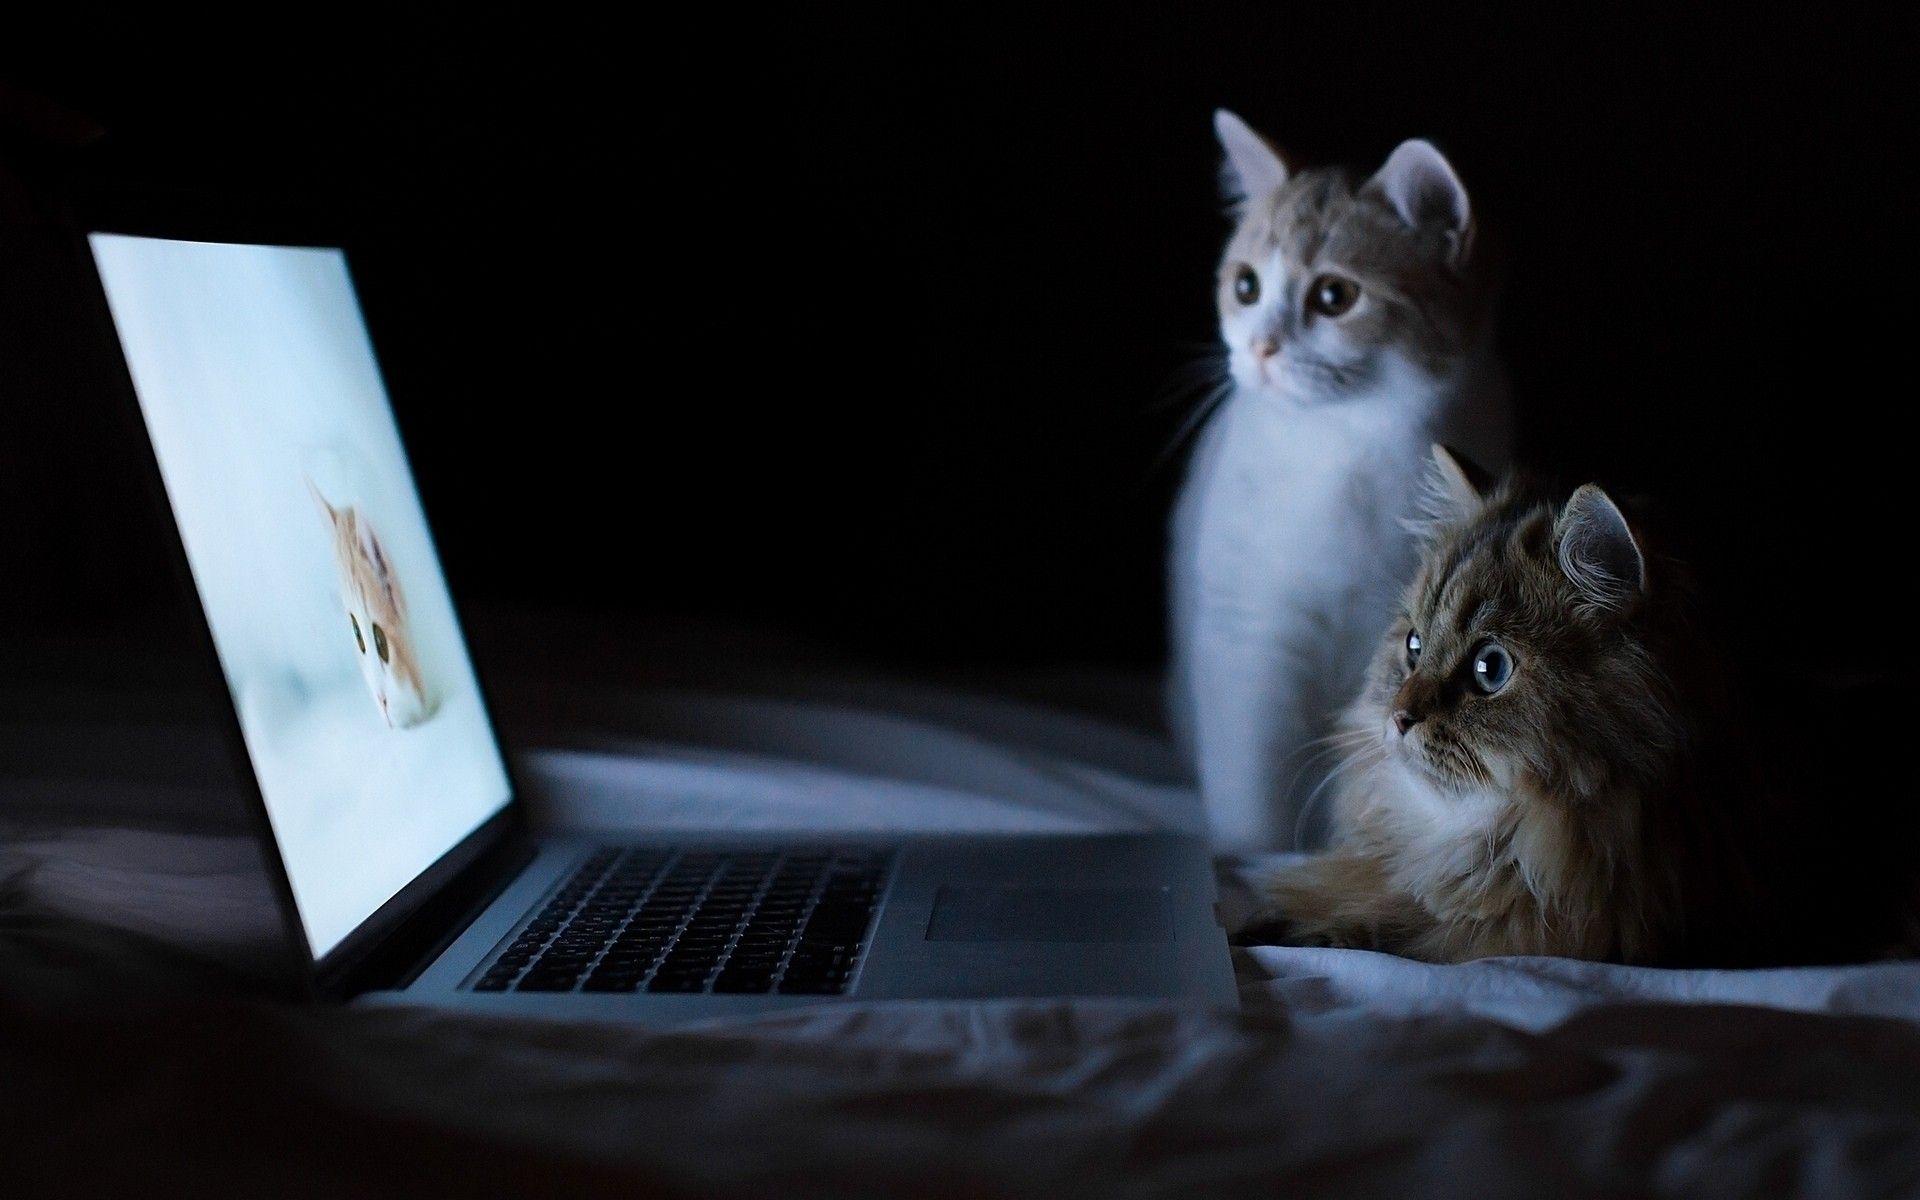 Two cats looking at desktop wallpaper with cat wallpaper download. Wallpaper, picture, photo